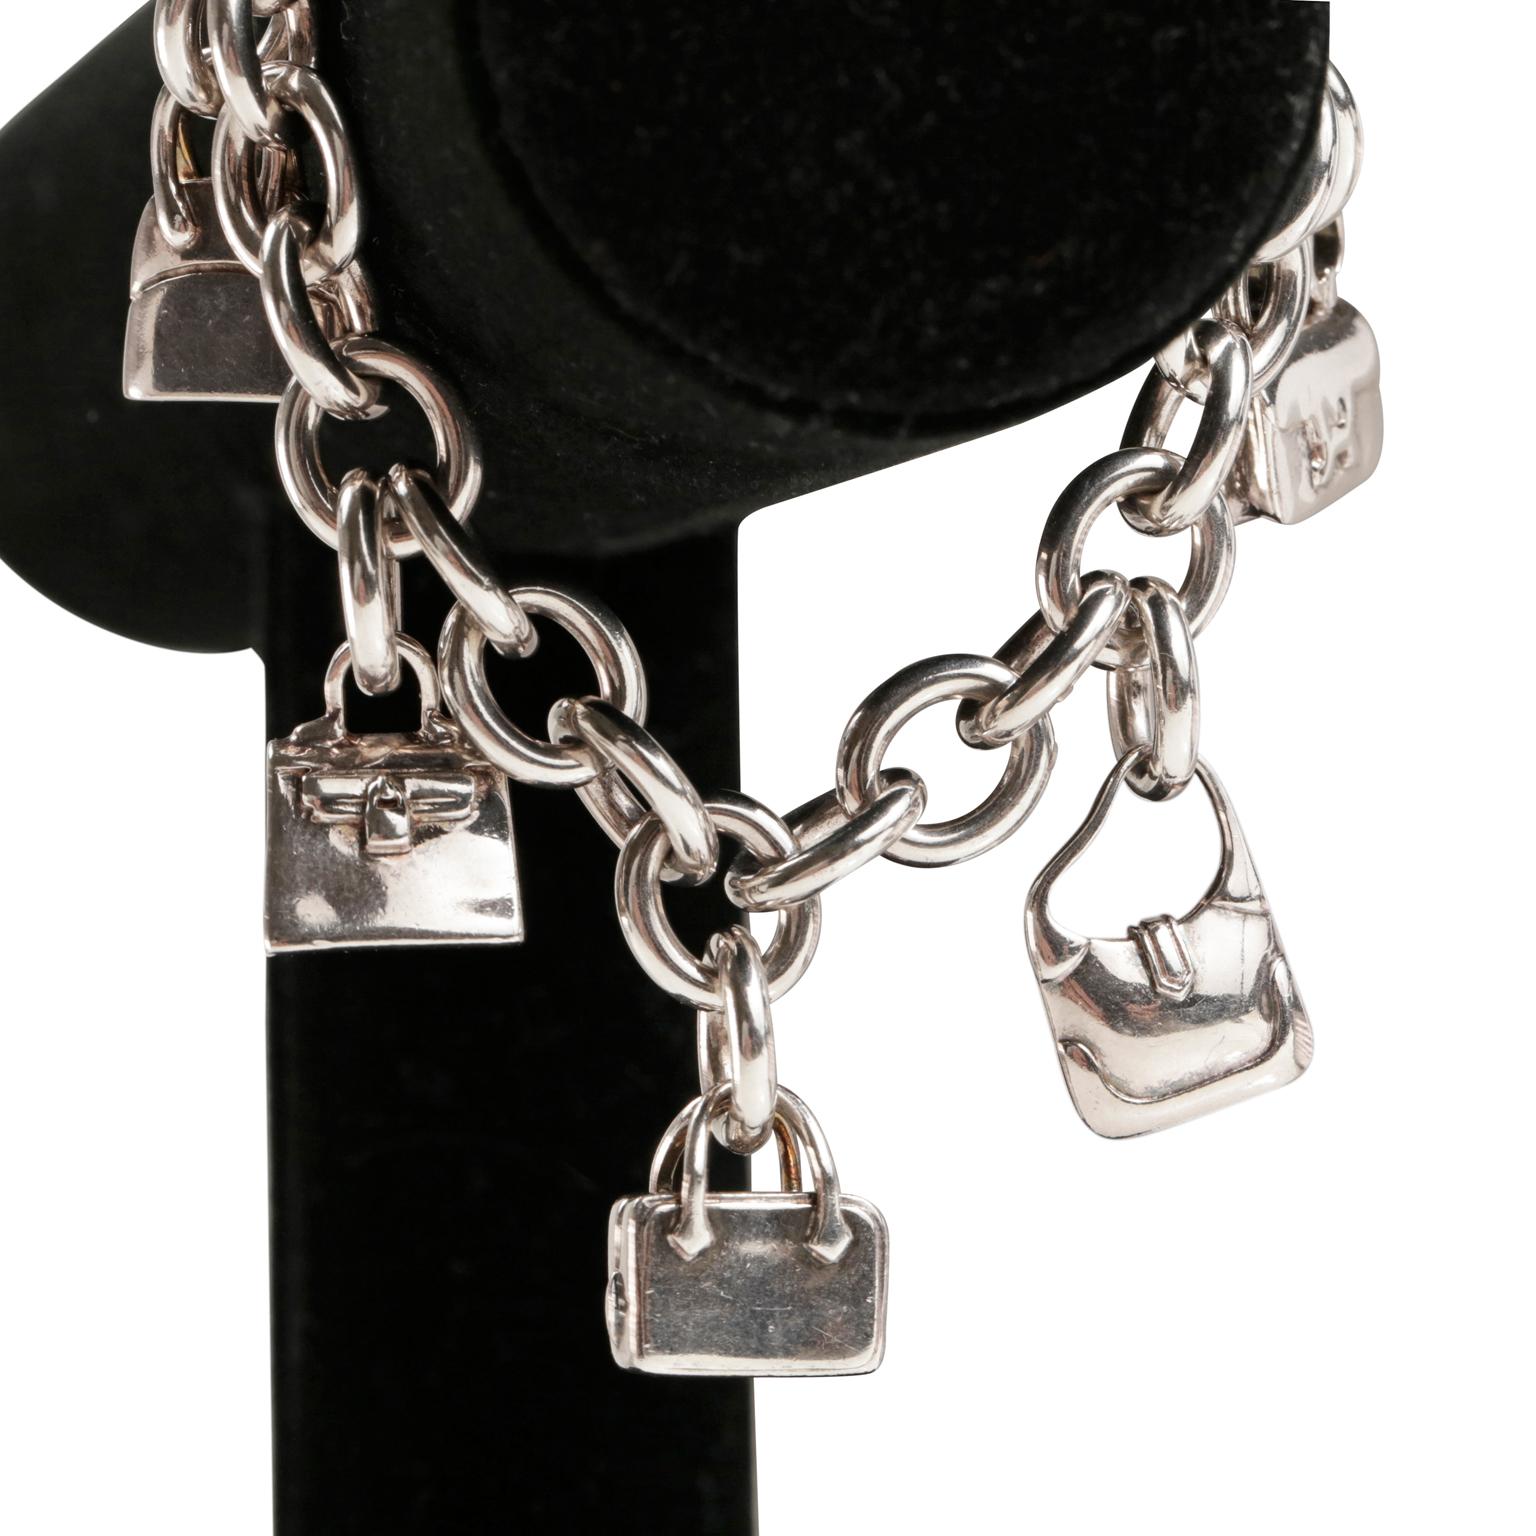 Hermès Sterling Silver Charm Bracelet- Excellent Condition
Adorned with five iconic Hermès bag charms, this is a wonderful piece for any collection. 
Sterling silver link chain with toggle closure.  Five iconic bag charms include a Constance, Kelly,